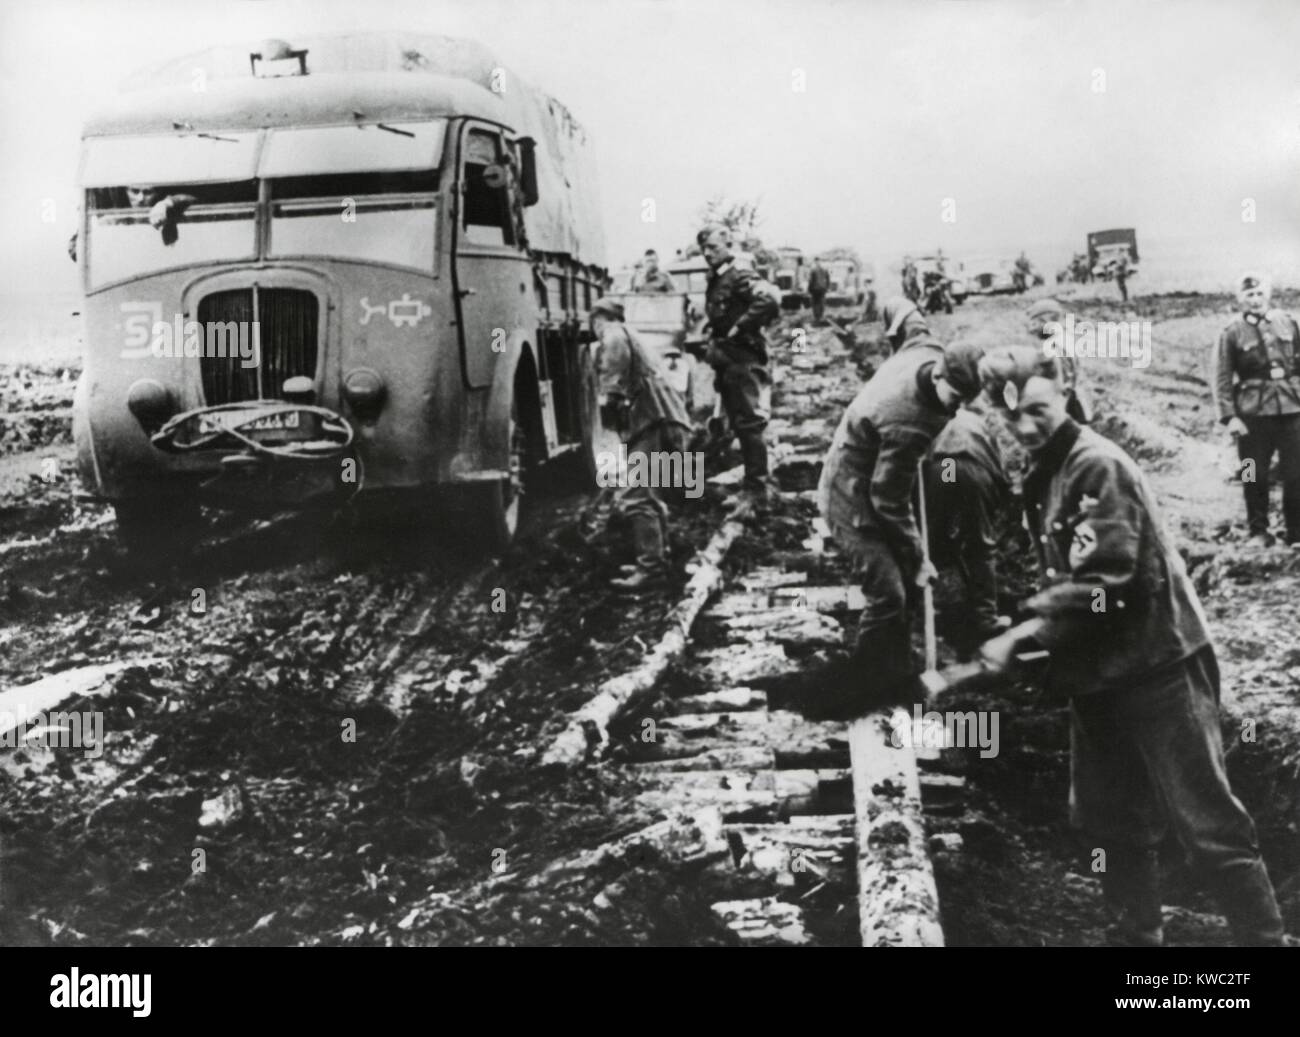 German army fights the autumn mud to supply the army in Stalingrad in Oct. 1942. Roadbuilders have laid logs to create a road bed, but it is still incomplete and unstable. World War 2 (BSLOC 2015 13 110) Stock Photo